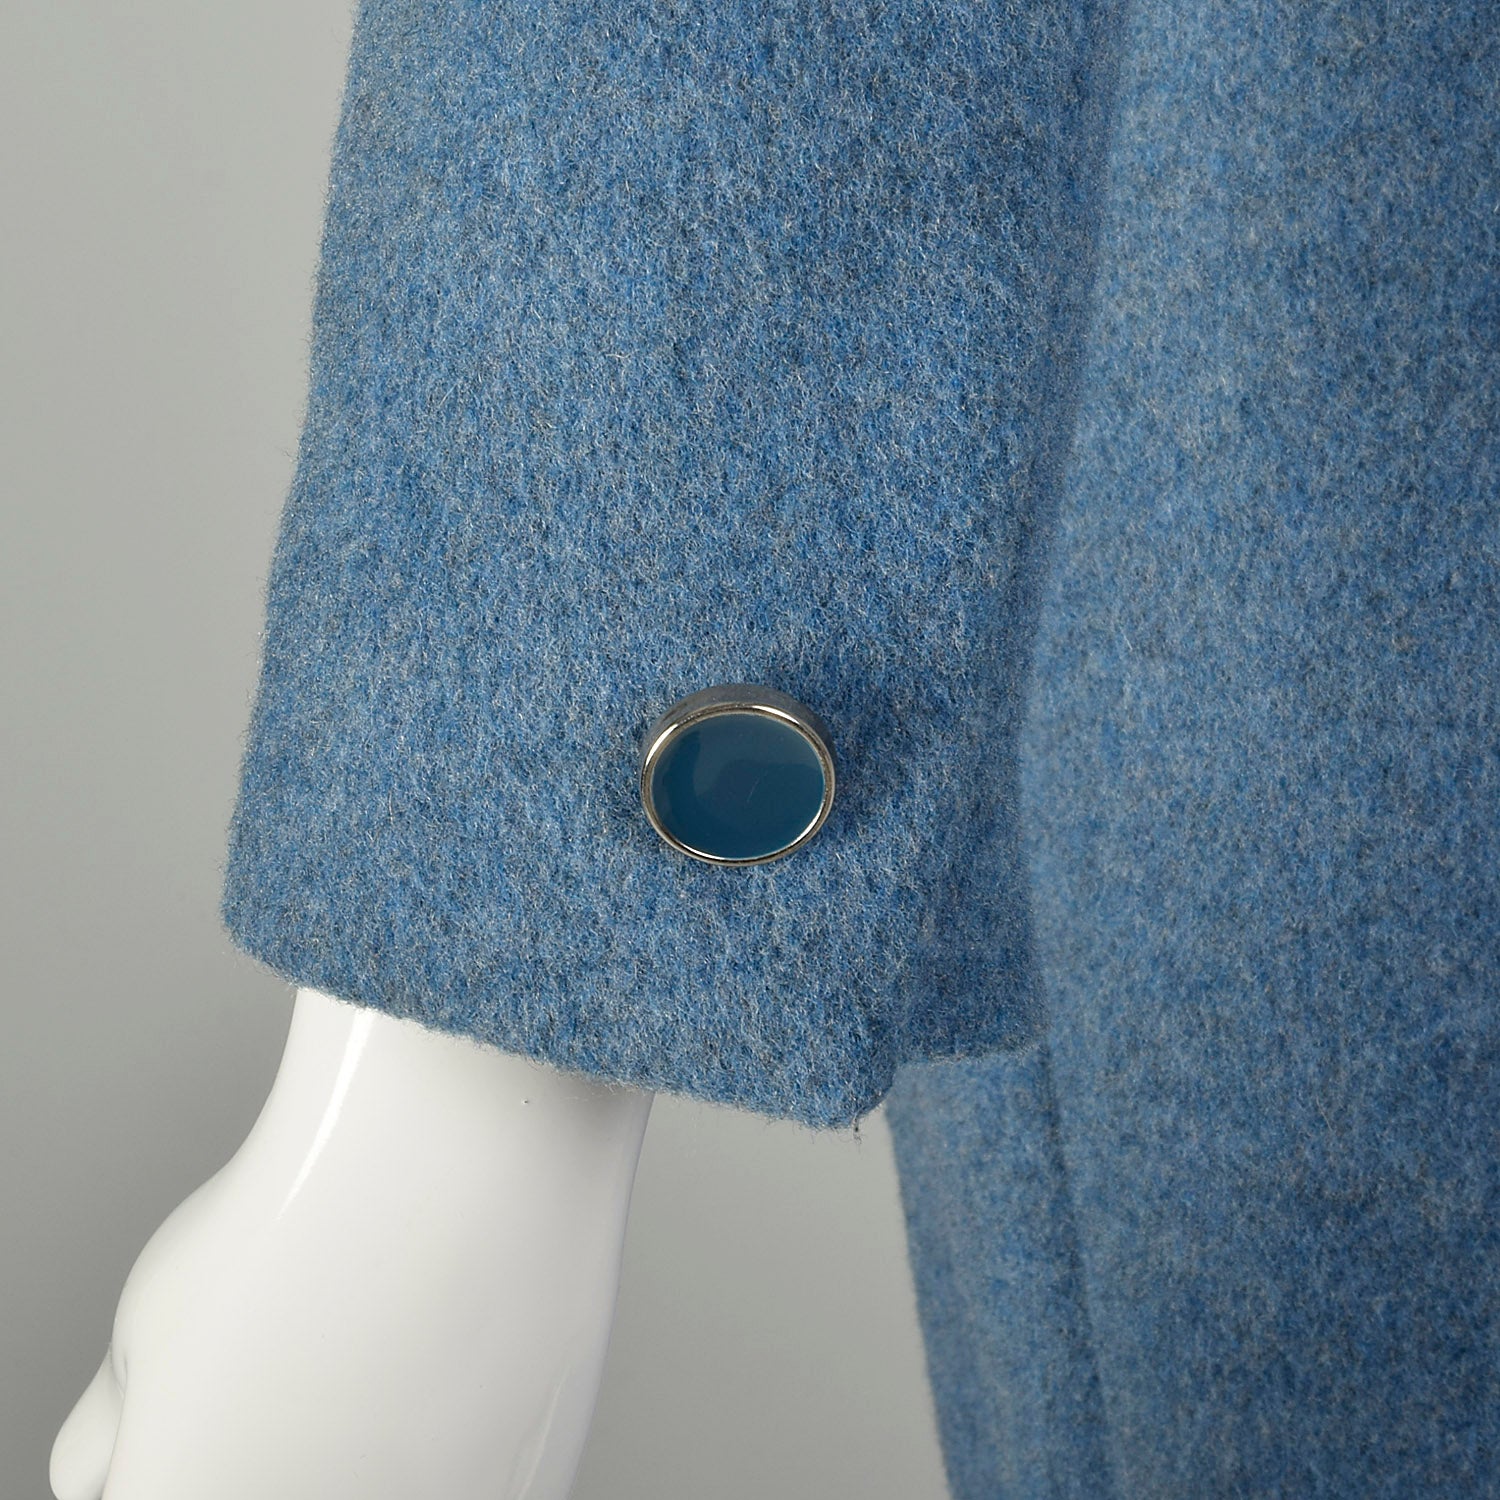 Small 1960s Coat Blue Wool Military Double Breasted Winter Vintage Outerwear